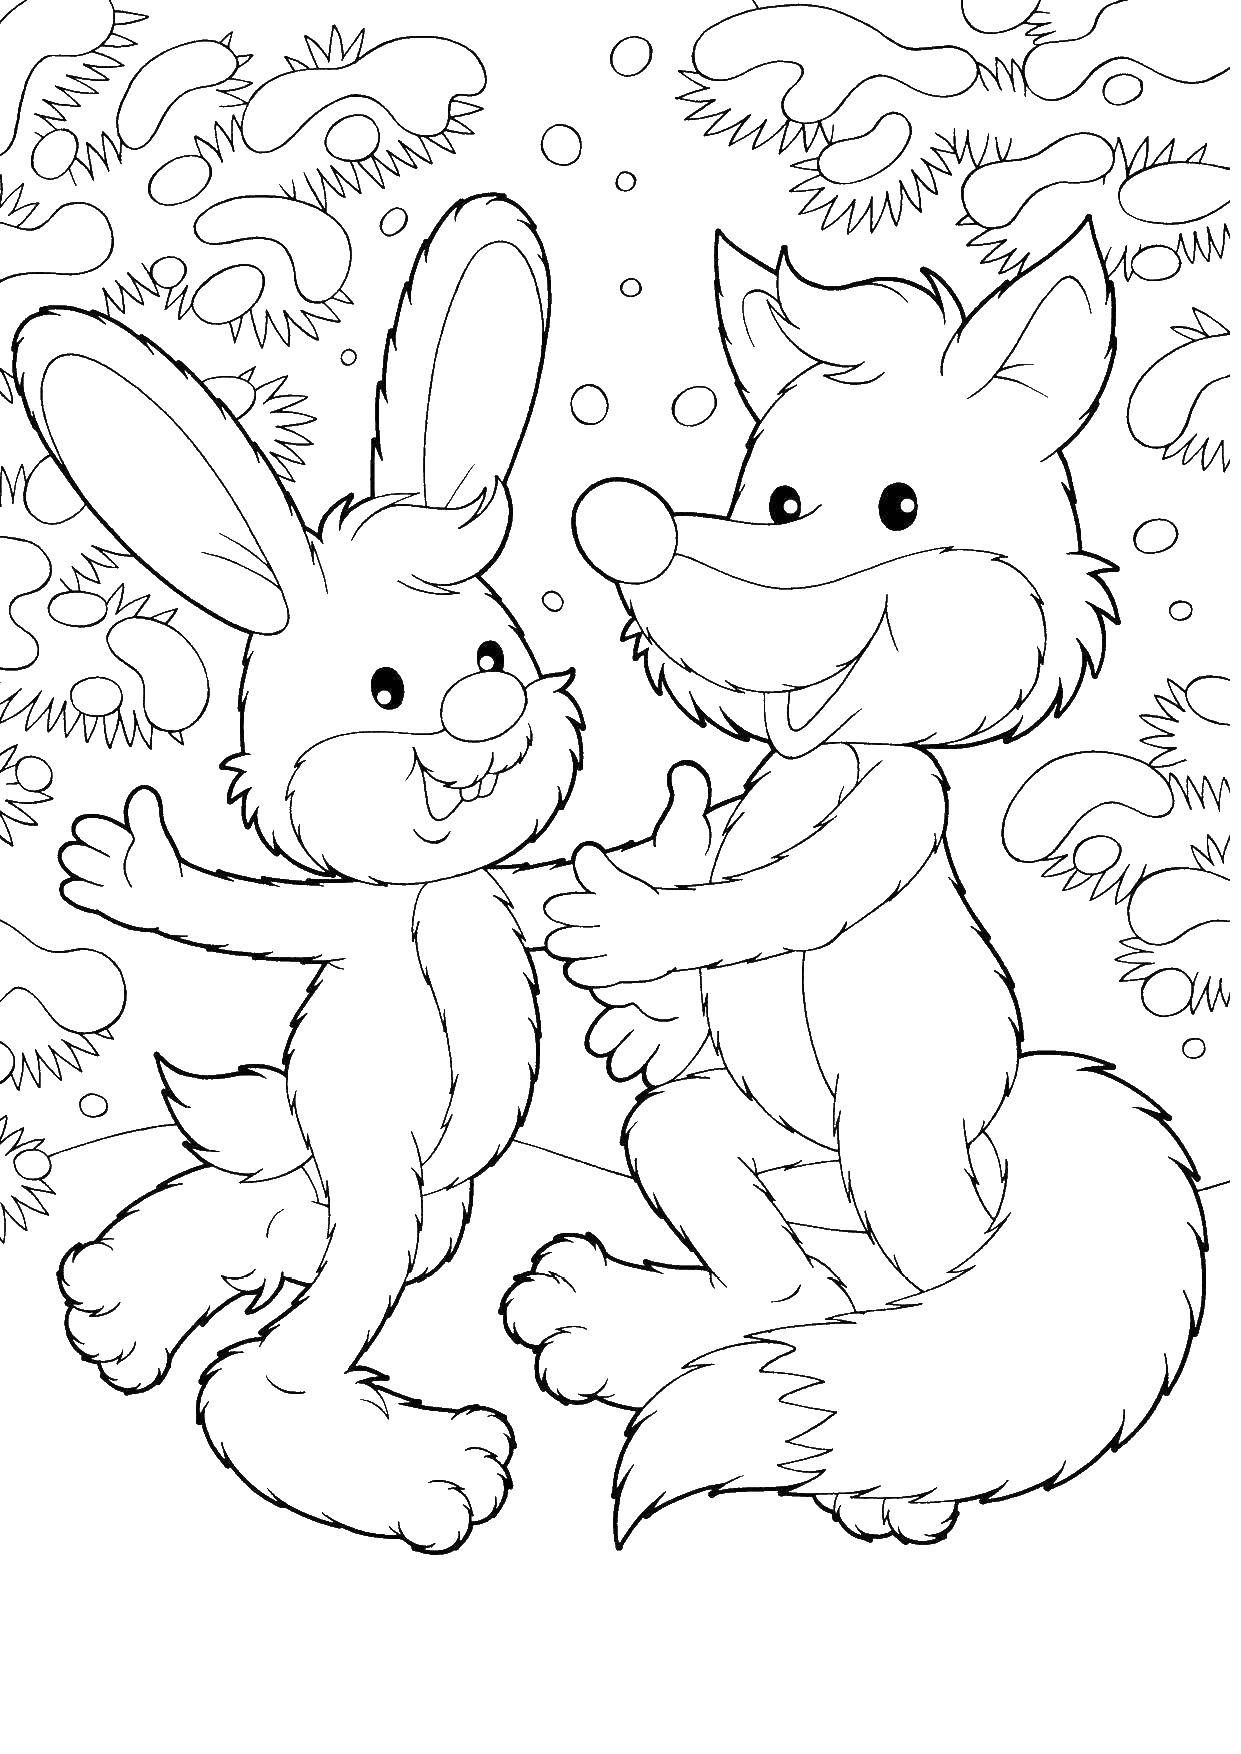 Coloring The Fox and the hare at the tree. Category the Fox. Tags:  a Fox, Bunny.